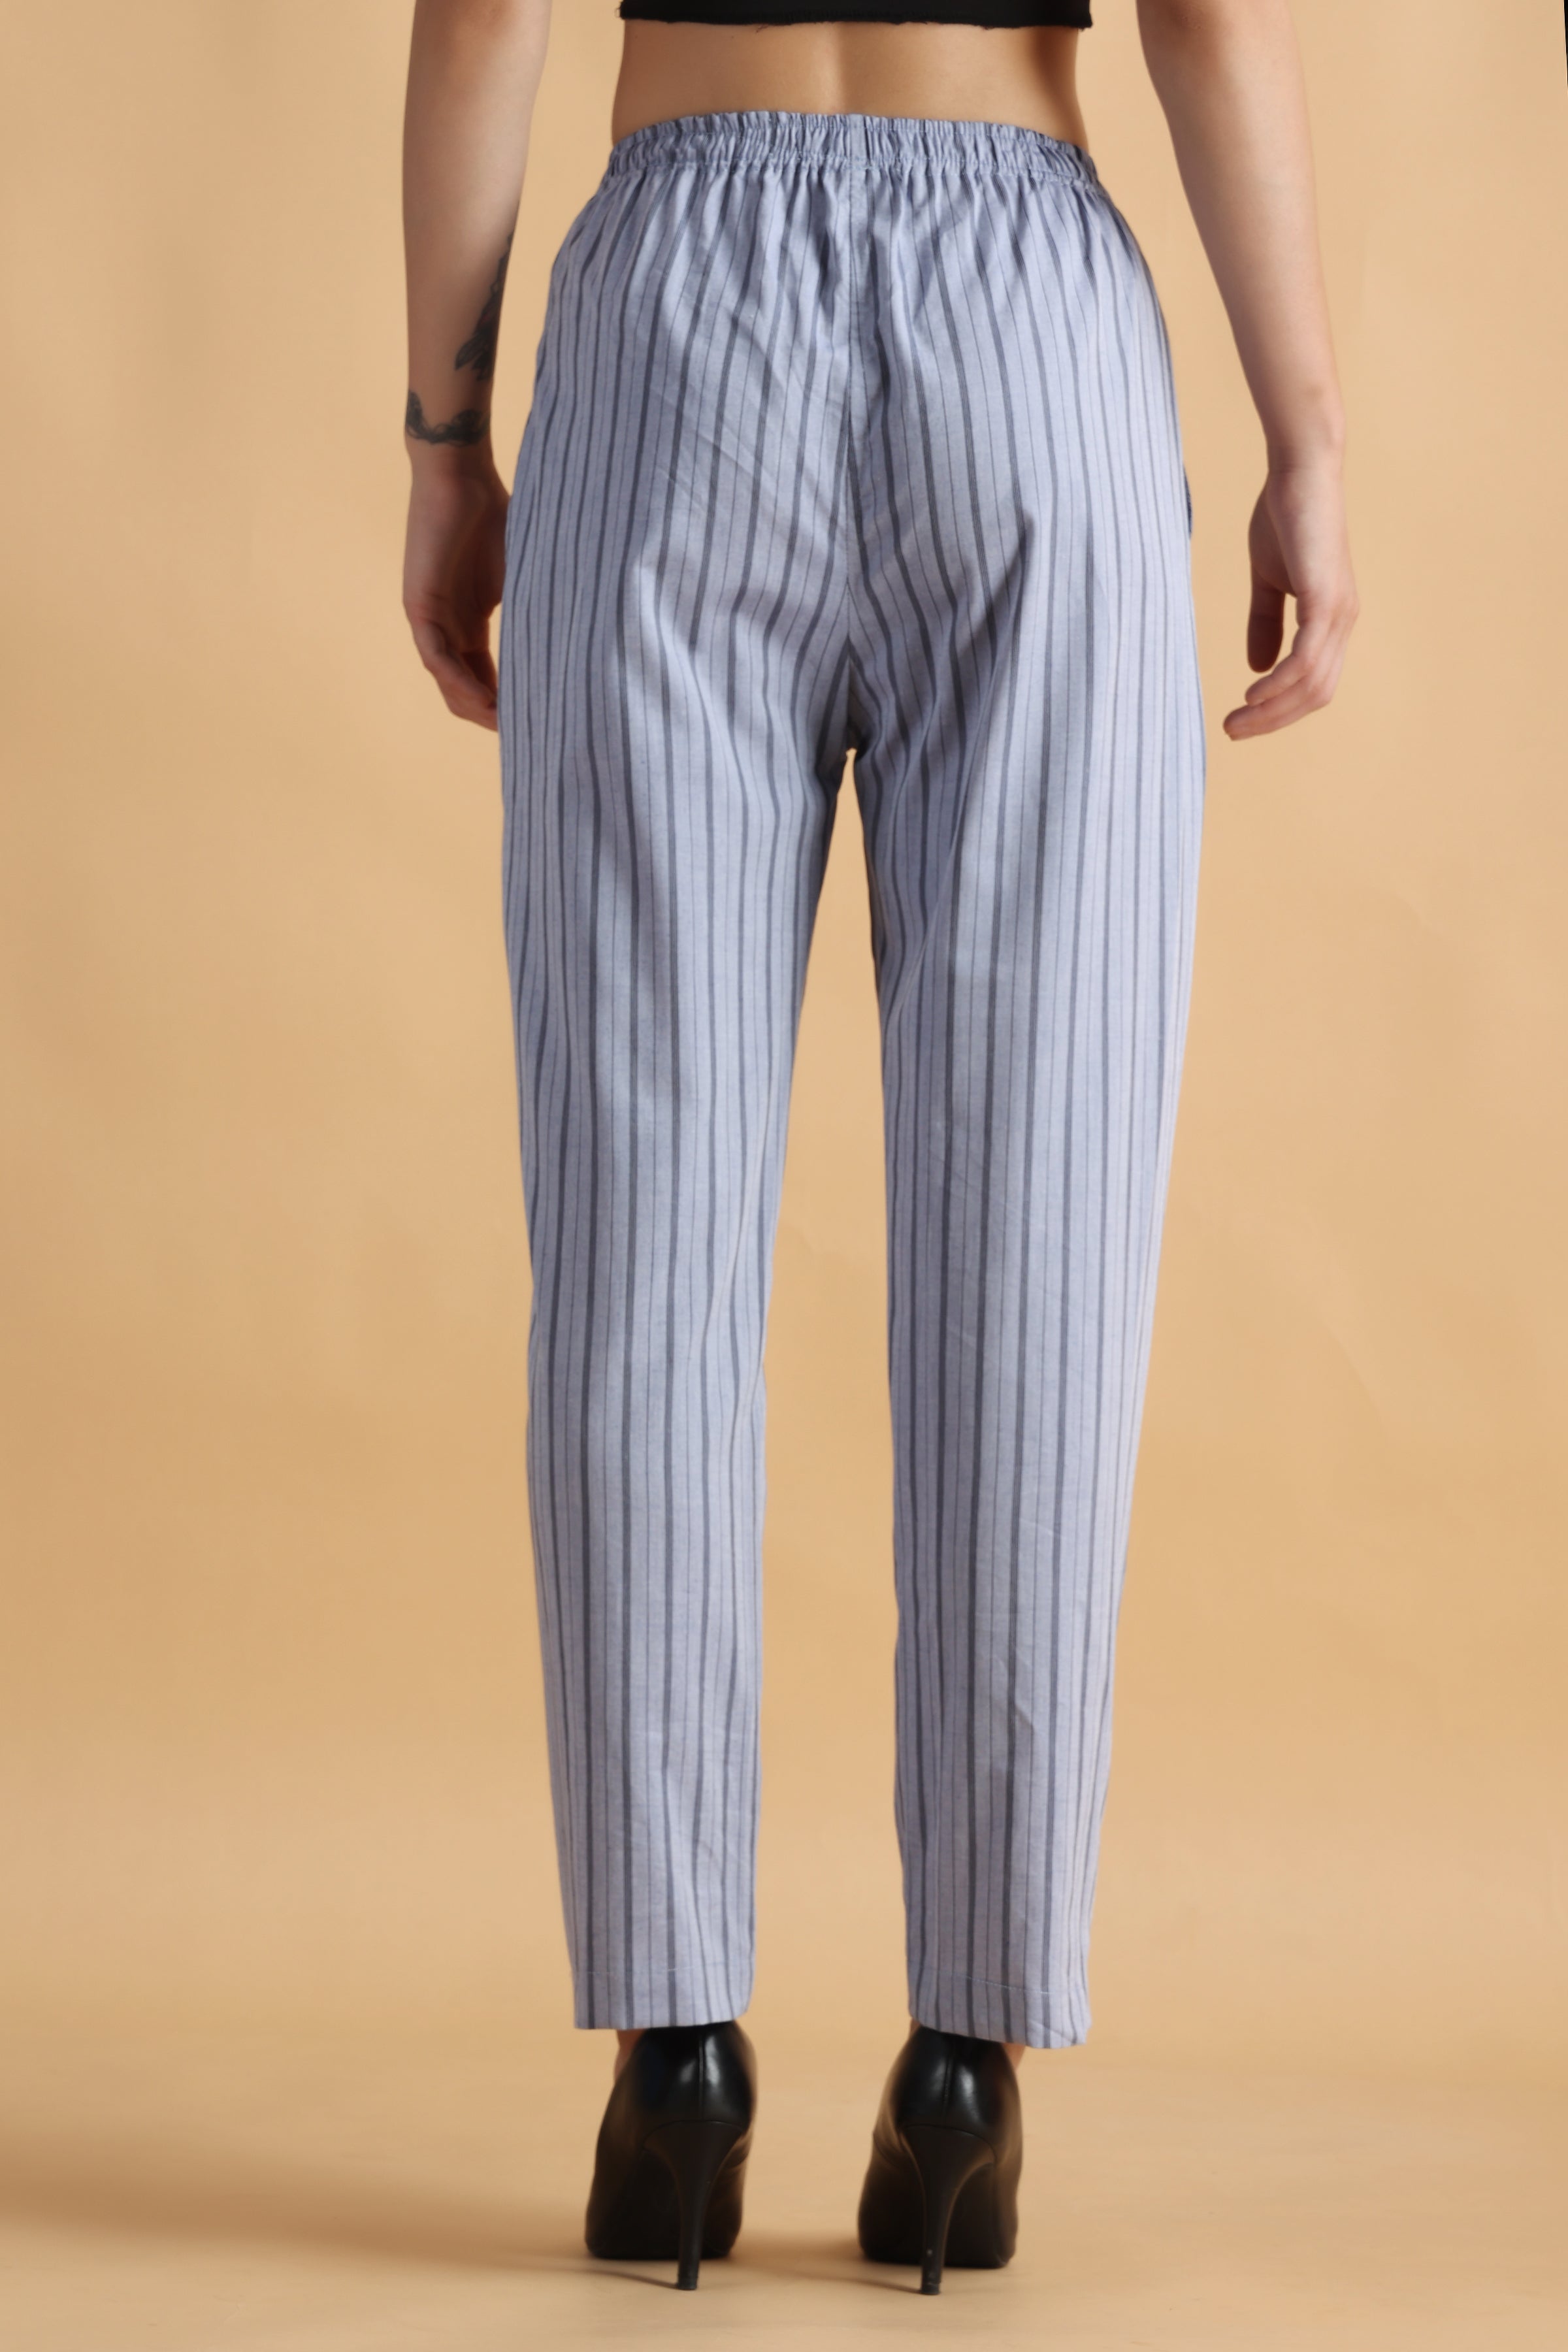 Buy Style Quotient Women Blue  White Original Tapered Fit Striped Cropped  Trousers SS19SQLOBOBW26 at Amazonin